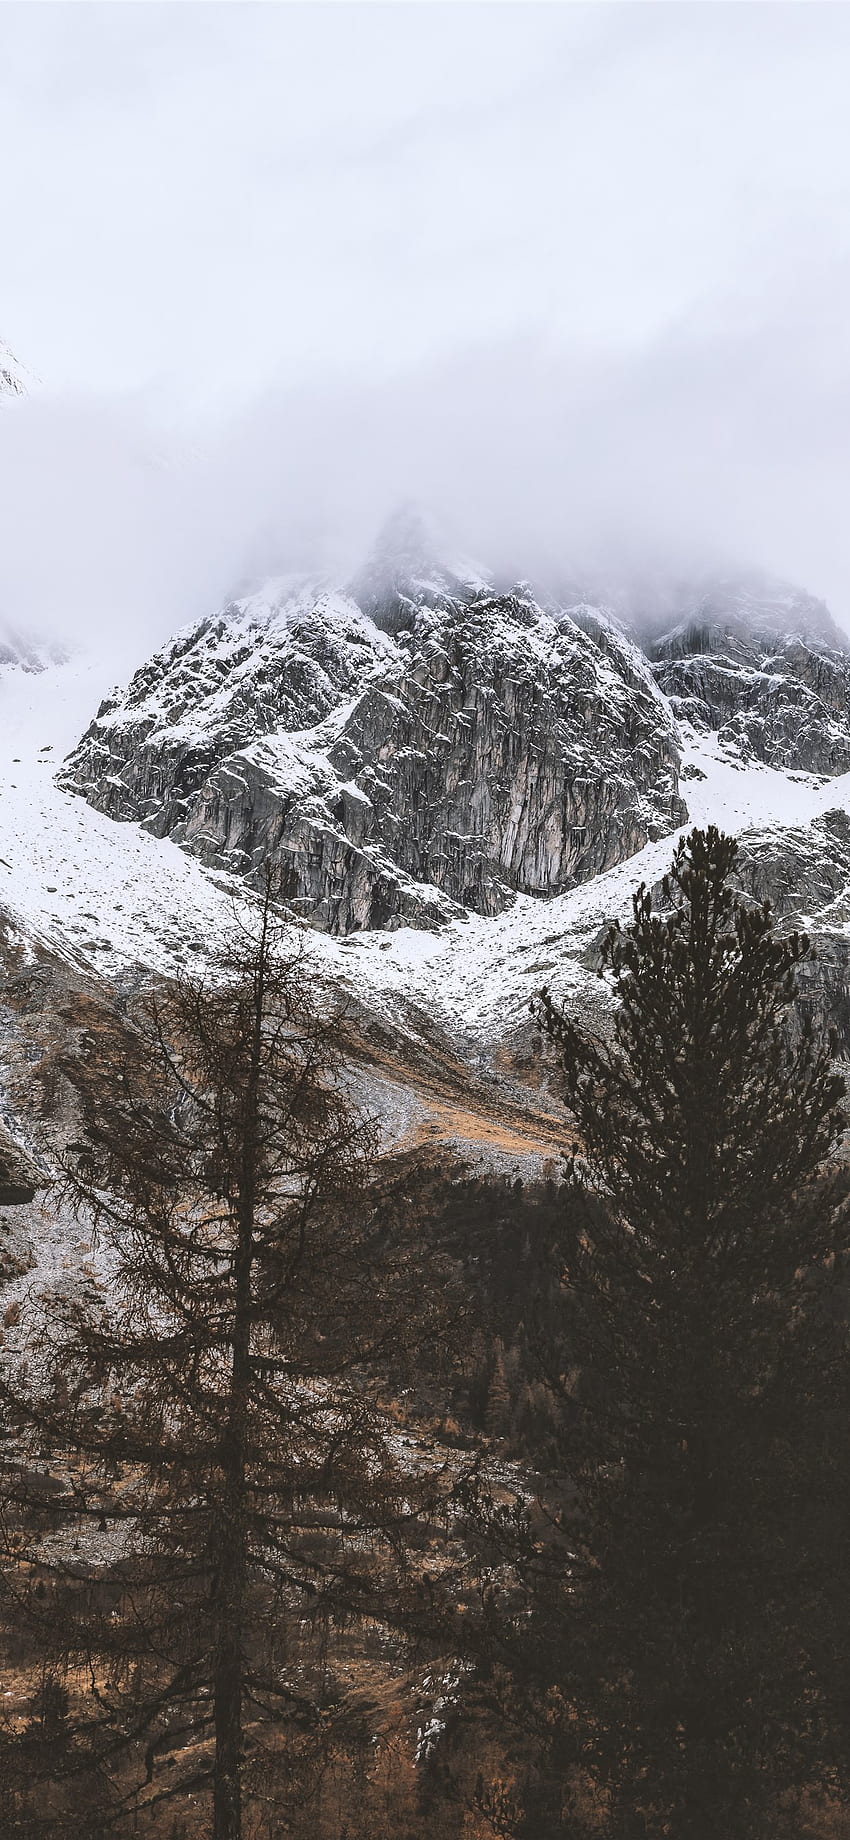 snow capped rocky mountain under cloudy sky iPhone X, Rocky Mountains iPhone HD phone wallpaper